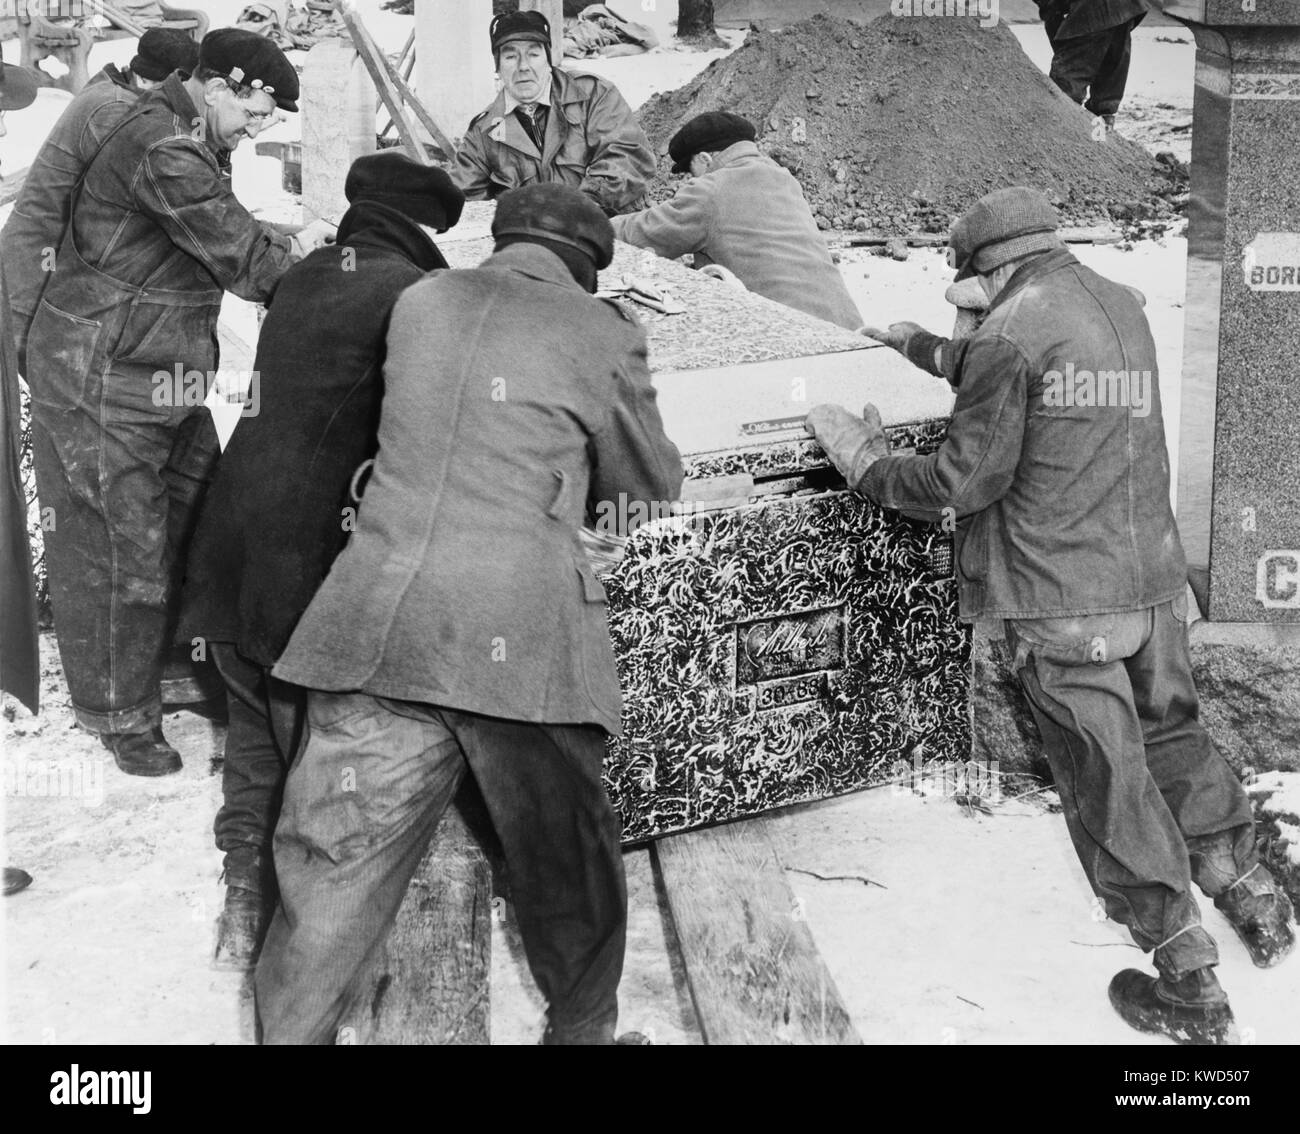 Burying Al Capone. Workmen at Mt. Olivet Cemetery in Chicago moving the vault with Al Capone's body. Feb. 6, 1947. (BSLOC 2014 13 215) Stock Photo